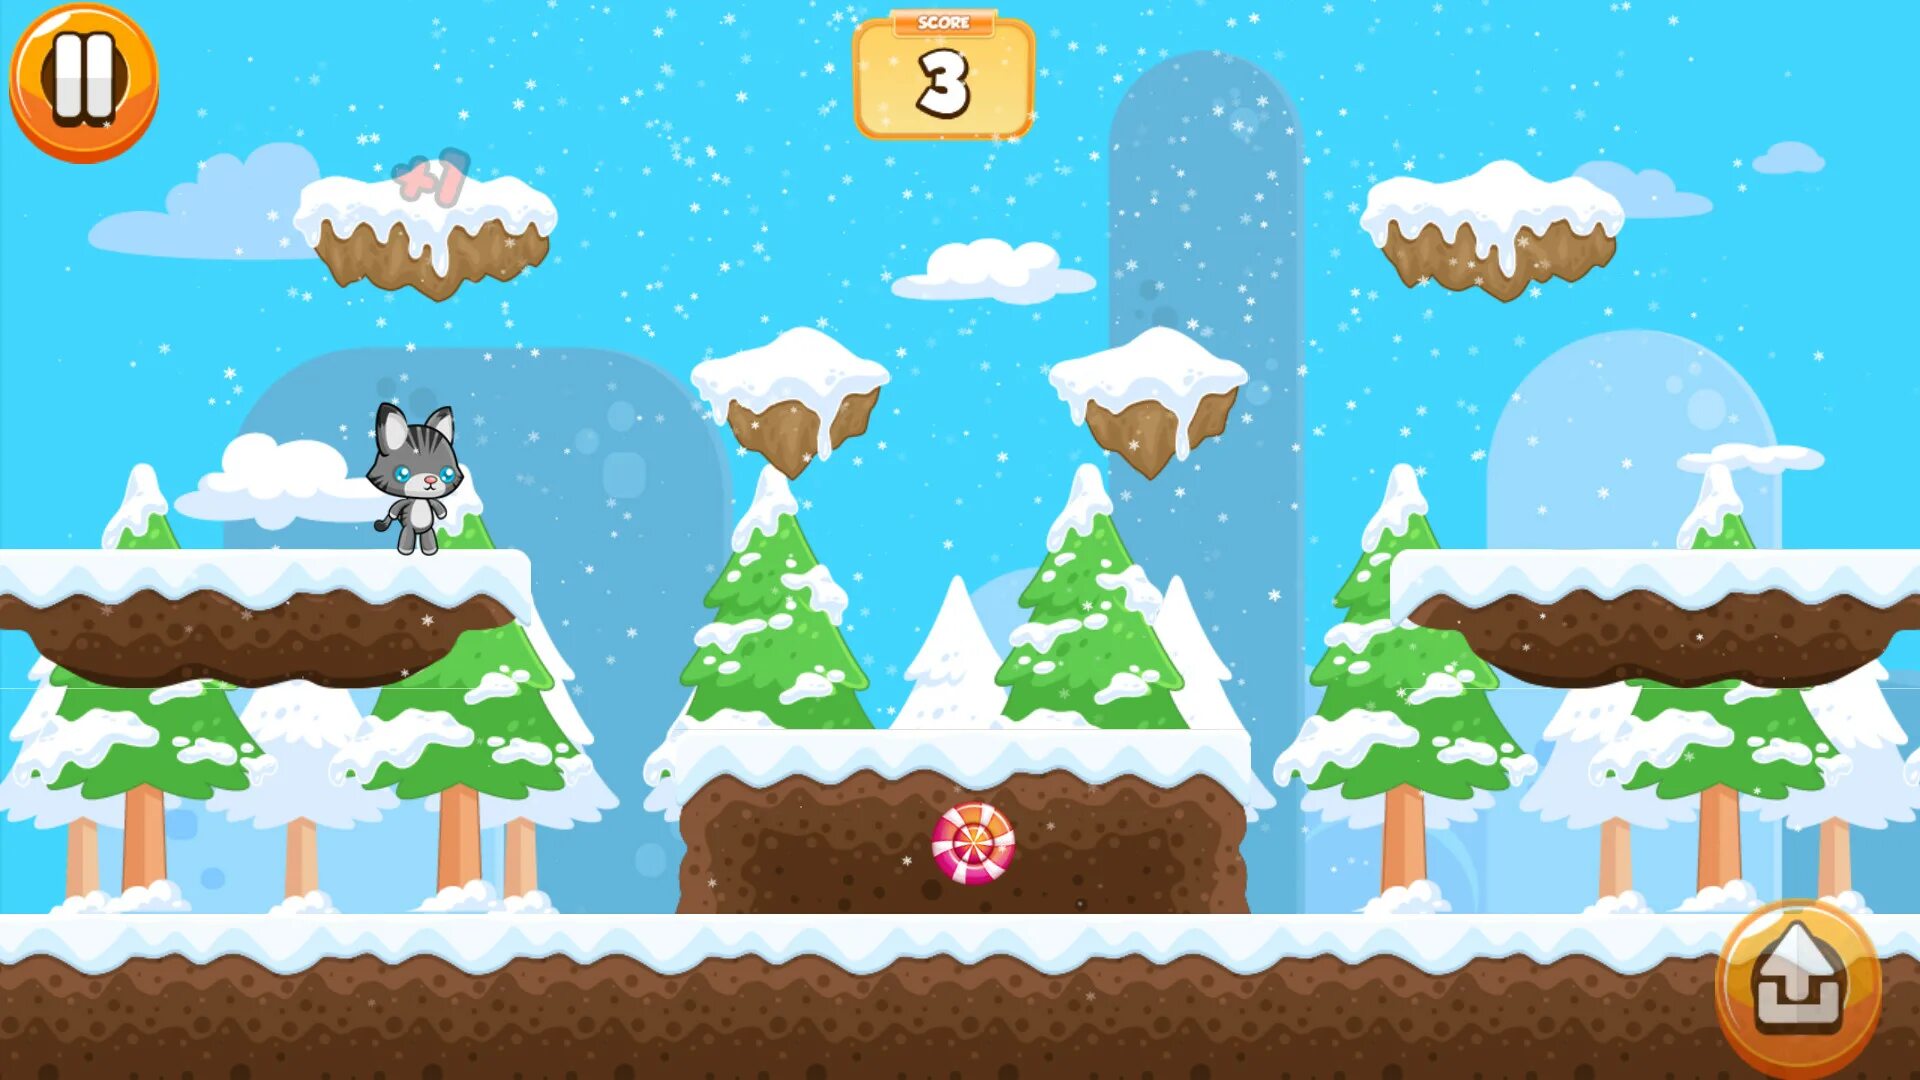 Wills to try games. Chase игра. Catch up игры. Kitty Chase игра. Игра платформе снежок.